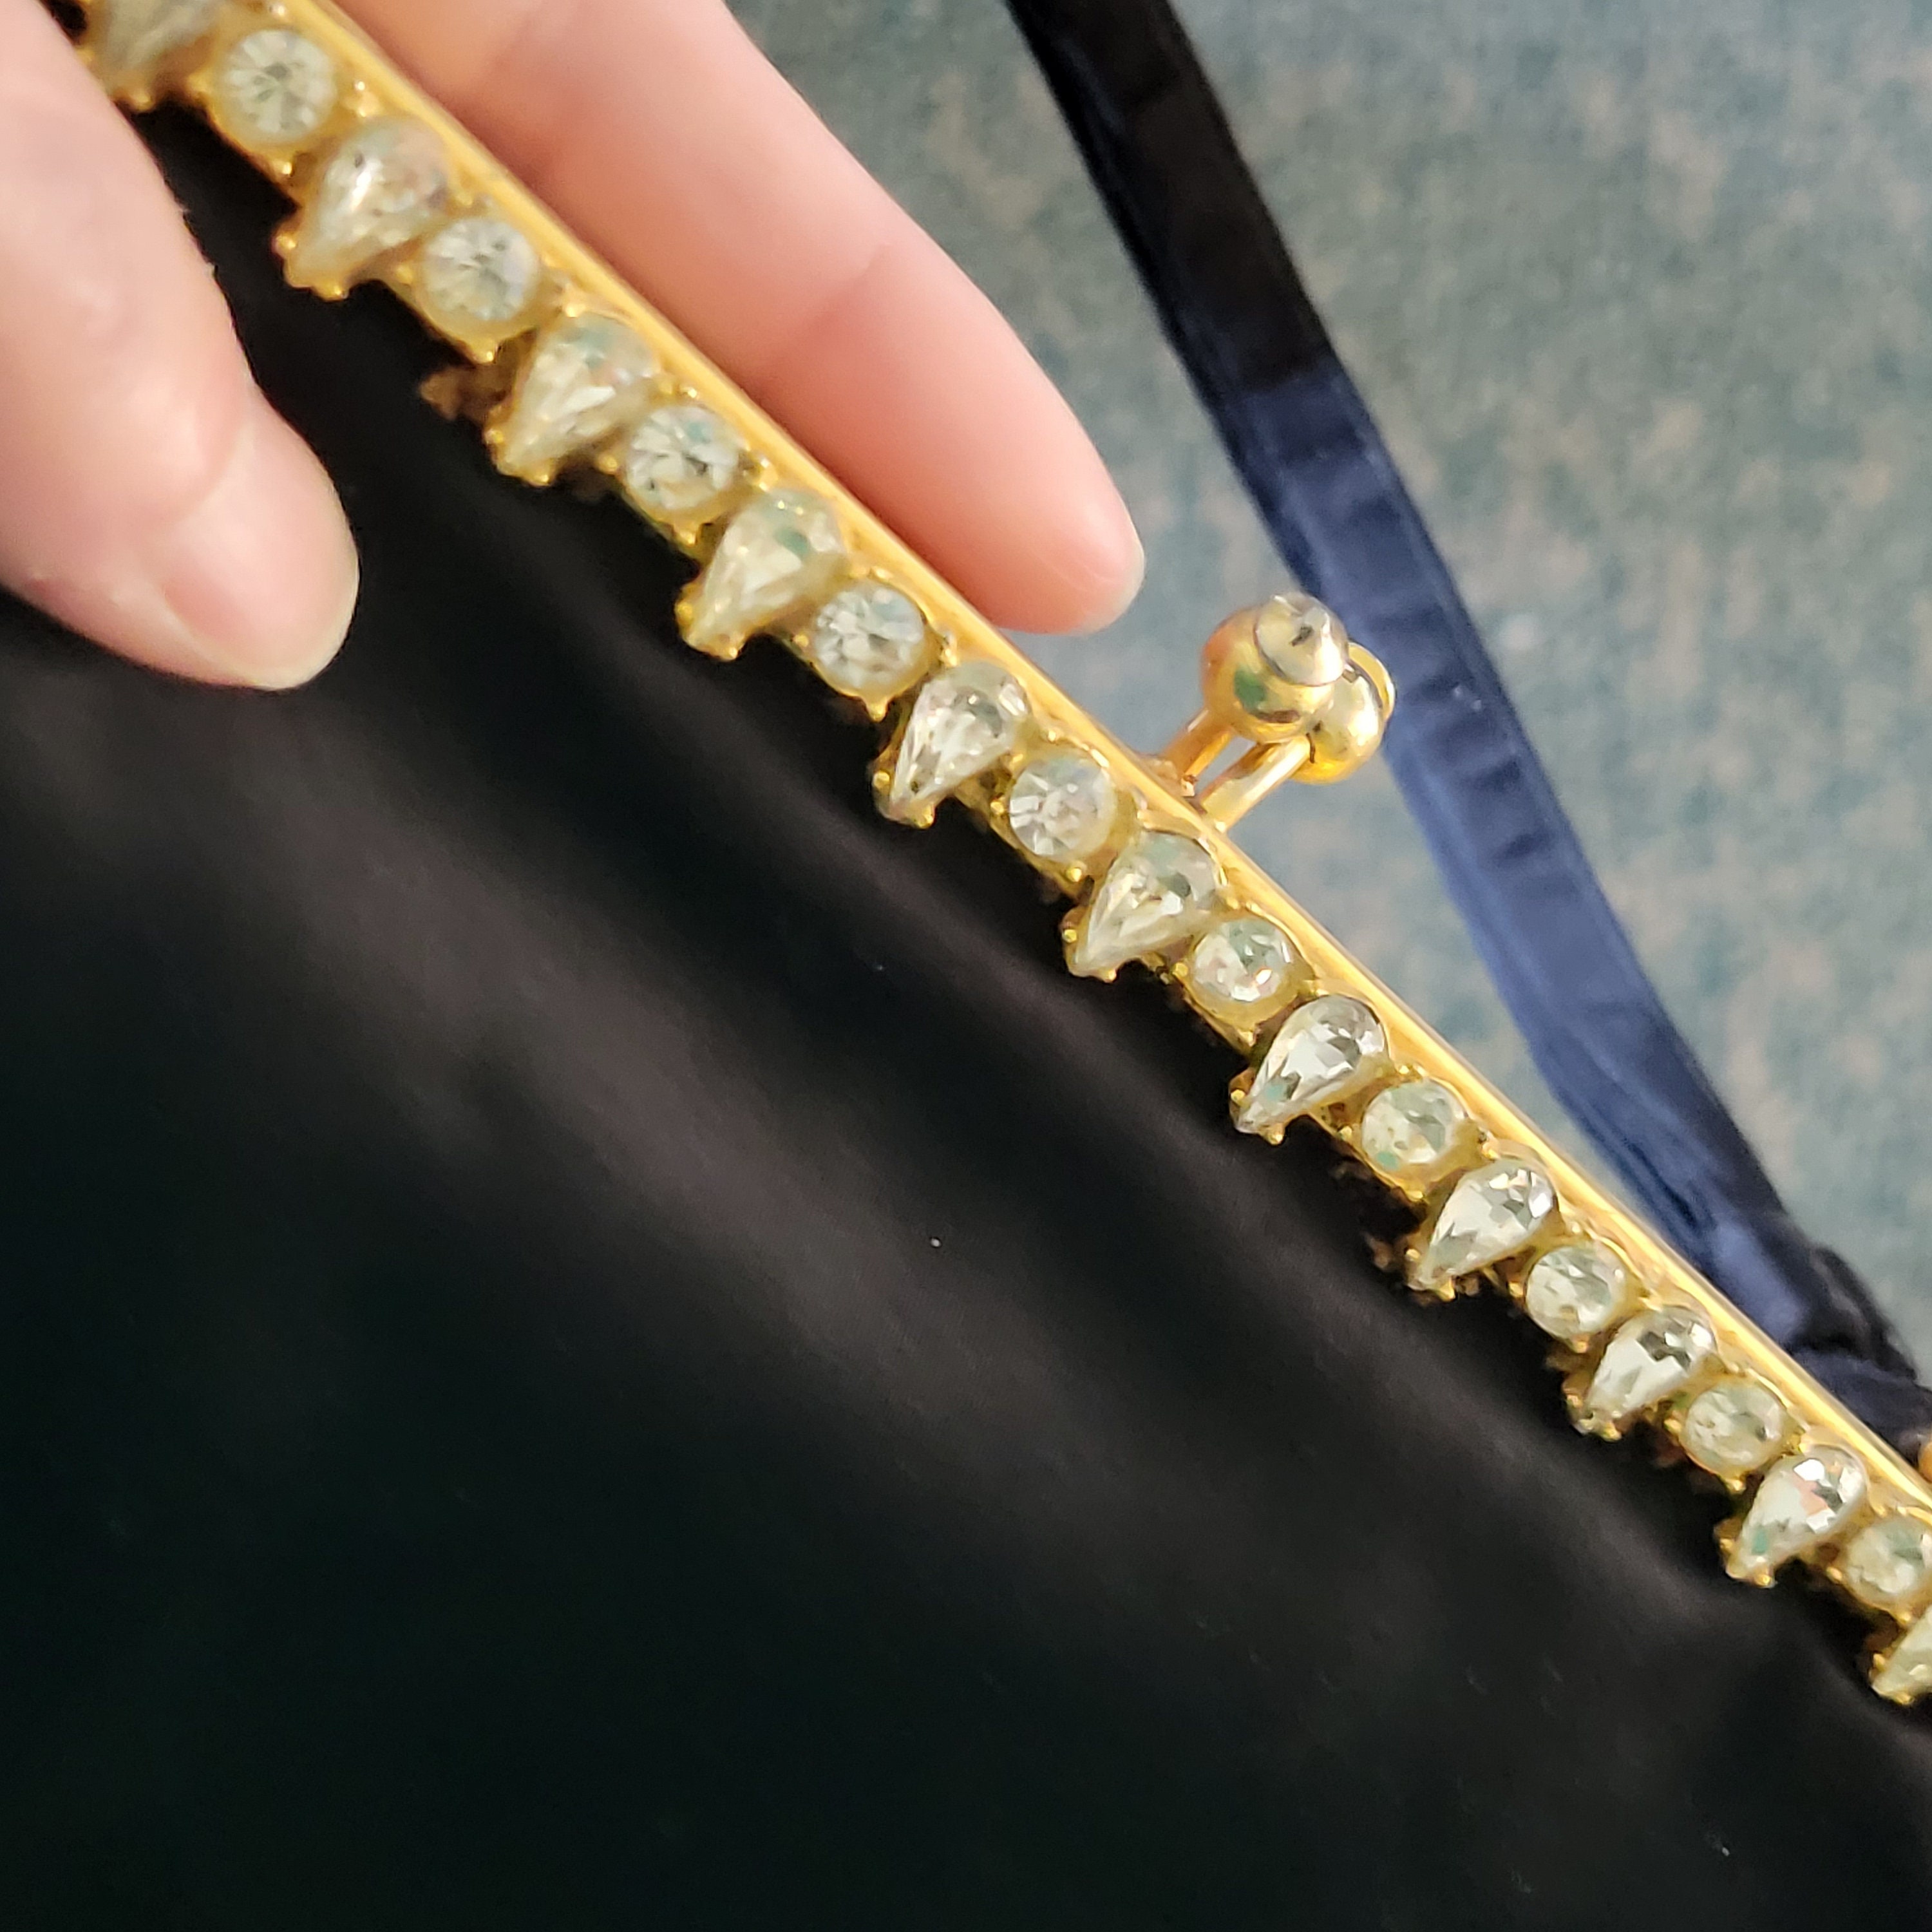 Luxurious Diamond Rhinestone Bag Party Clutch Purse Crystal Evening Banquet  Handbag Silver Gold And Black Color From Nancy1984, $46.64